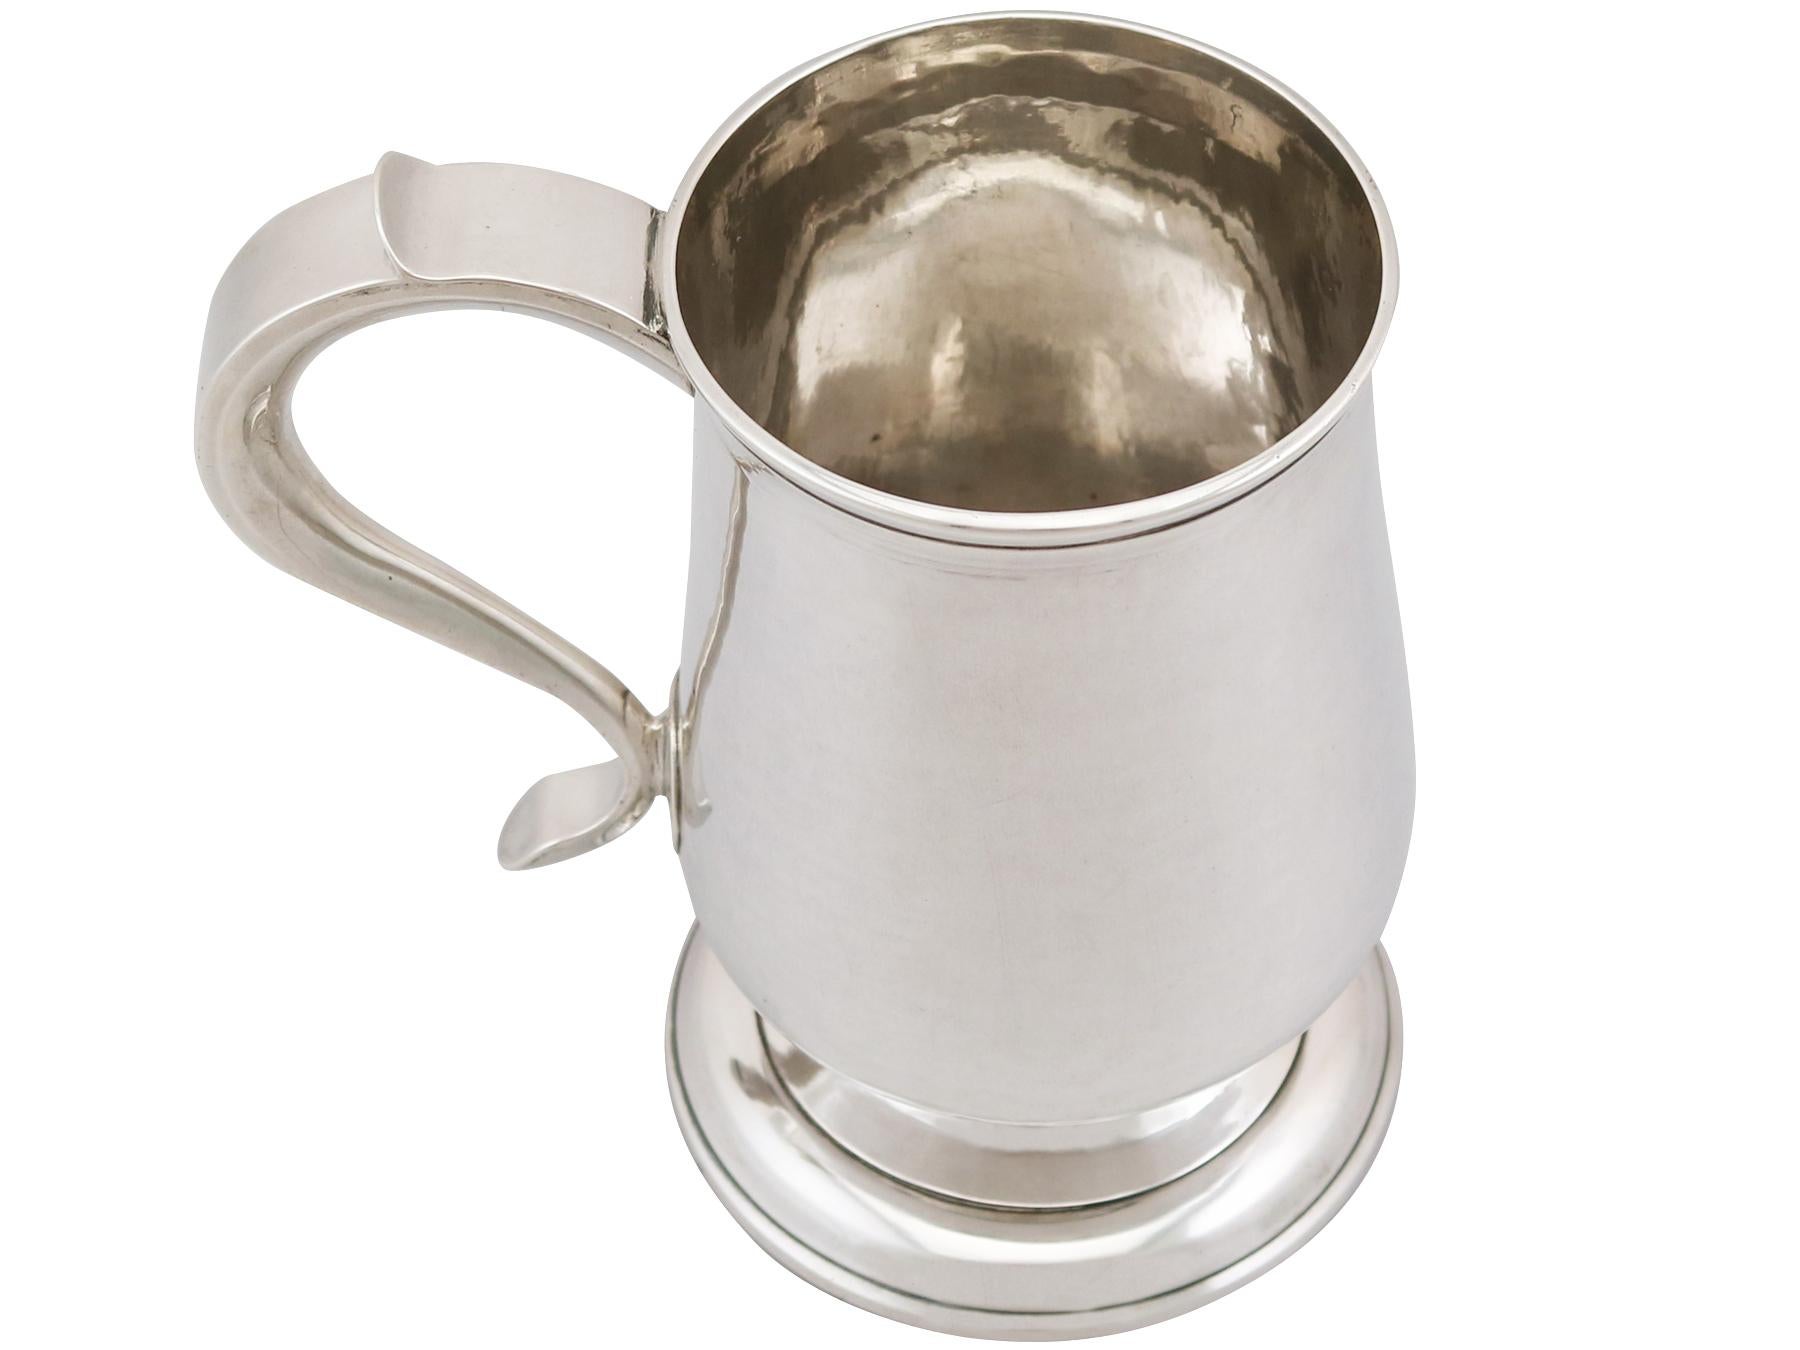 A fine and impressive antique Georgian Newcastle sterling silver pint mug made by John Robertson I & David Darling; an addition to our range of collectable silverware.

This fine antique George III Newcastle sterling silver mug has a plain